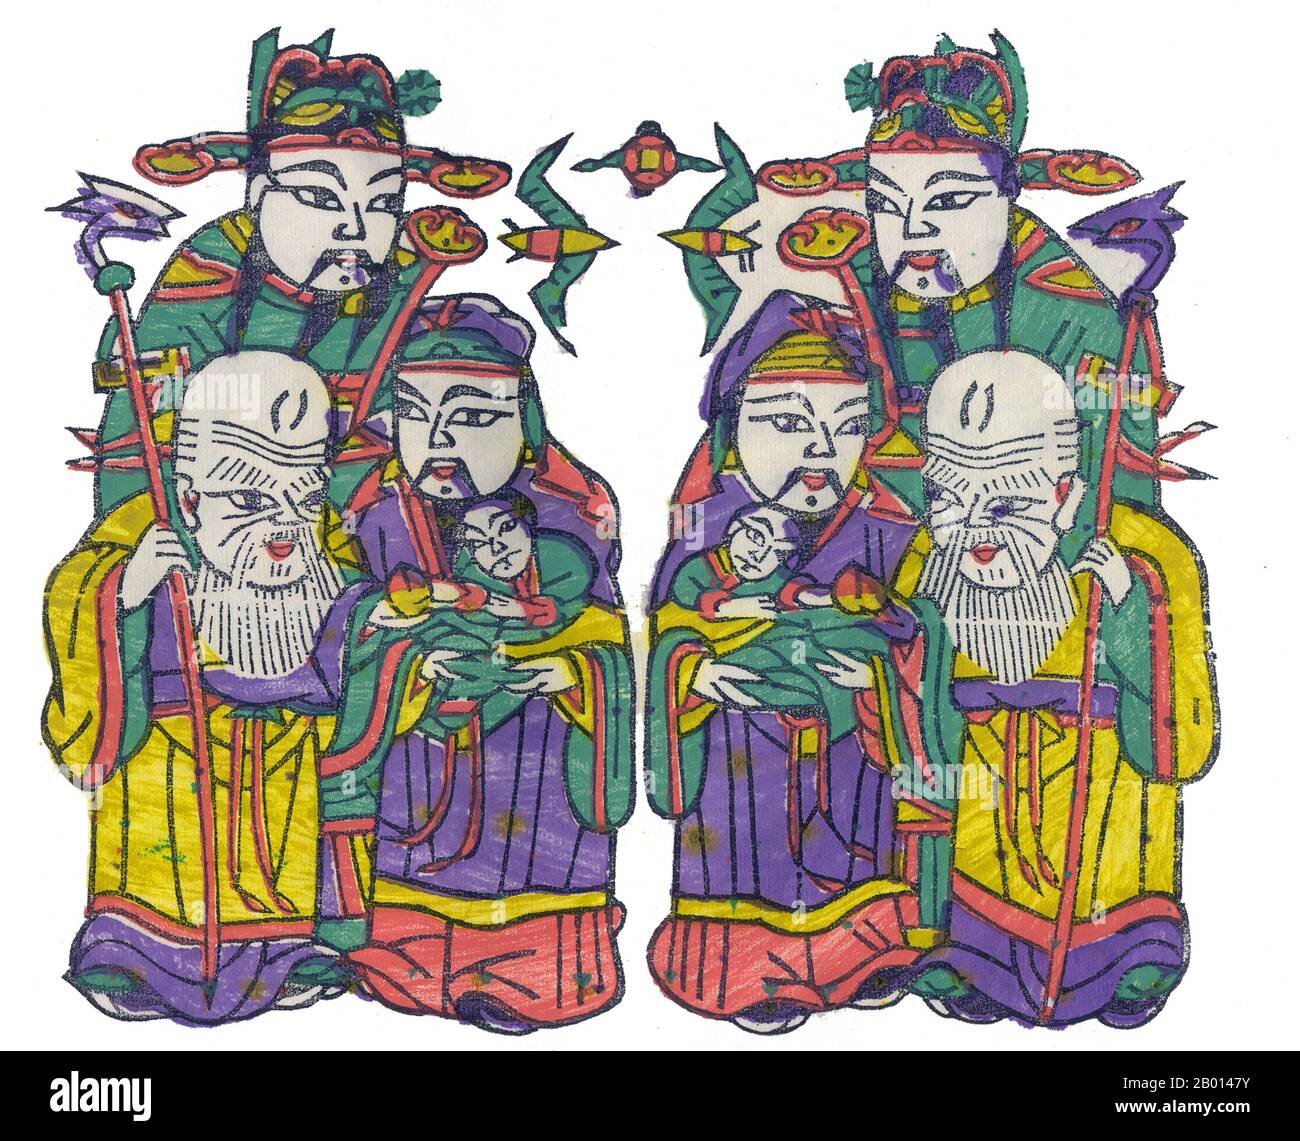 China: The Daoist Gods of Good Fortune (Fu), Prosperity (Lu) and Longevity (Shou), referred to collectively as Fulushou or the Sanxing. Woodcut painting, c. 20th century.  The term Fu Lu Shou or Fulushou collectively refers to the concept of Good Fortune (Fu), Prosperity (Lu), and Longevity (Shou). This Taoist concept is thought to date back to the Ming Dynasty, when the Fu Star, Lu Star and Shou Star were considered to be personified deities of these attributes respectively. The term is commonly used in Chinese culture to denote the three attributes of a good life. Stock Photo